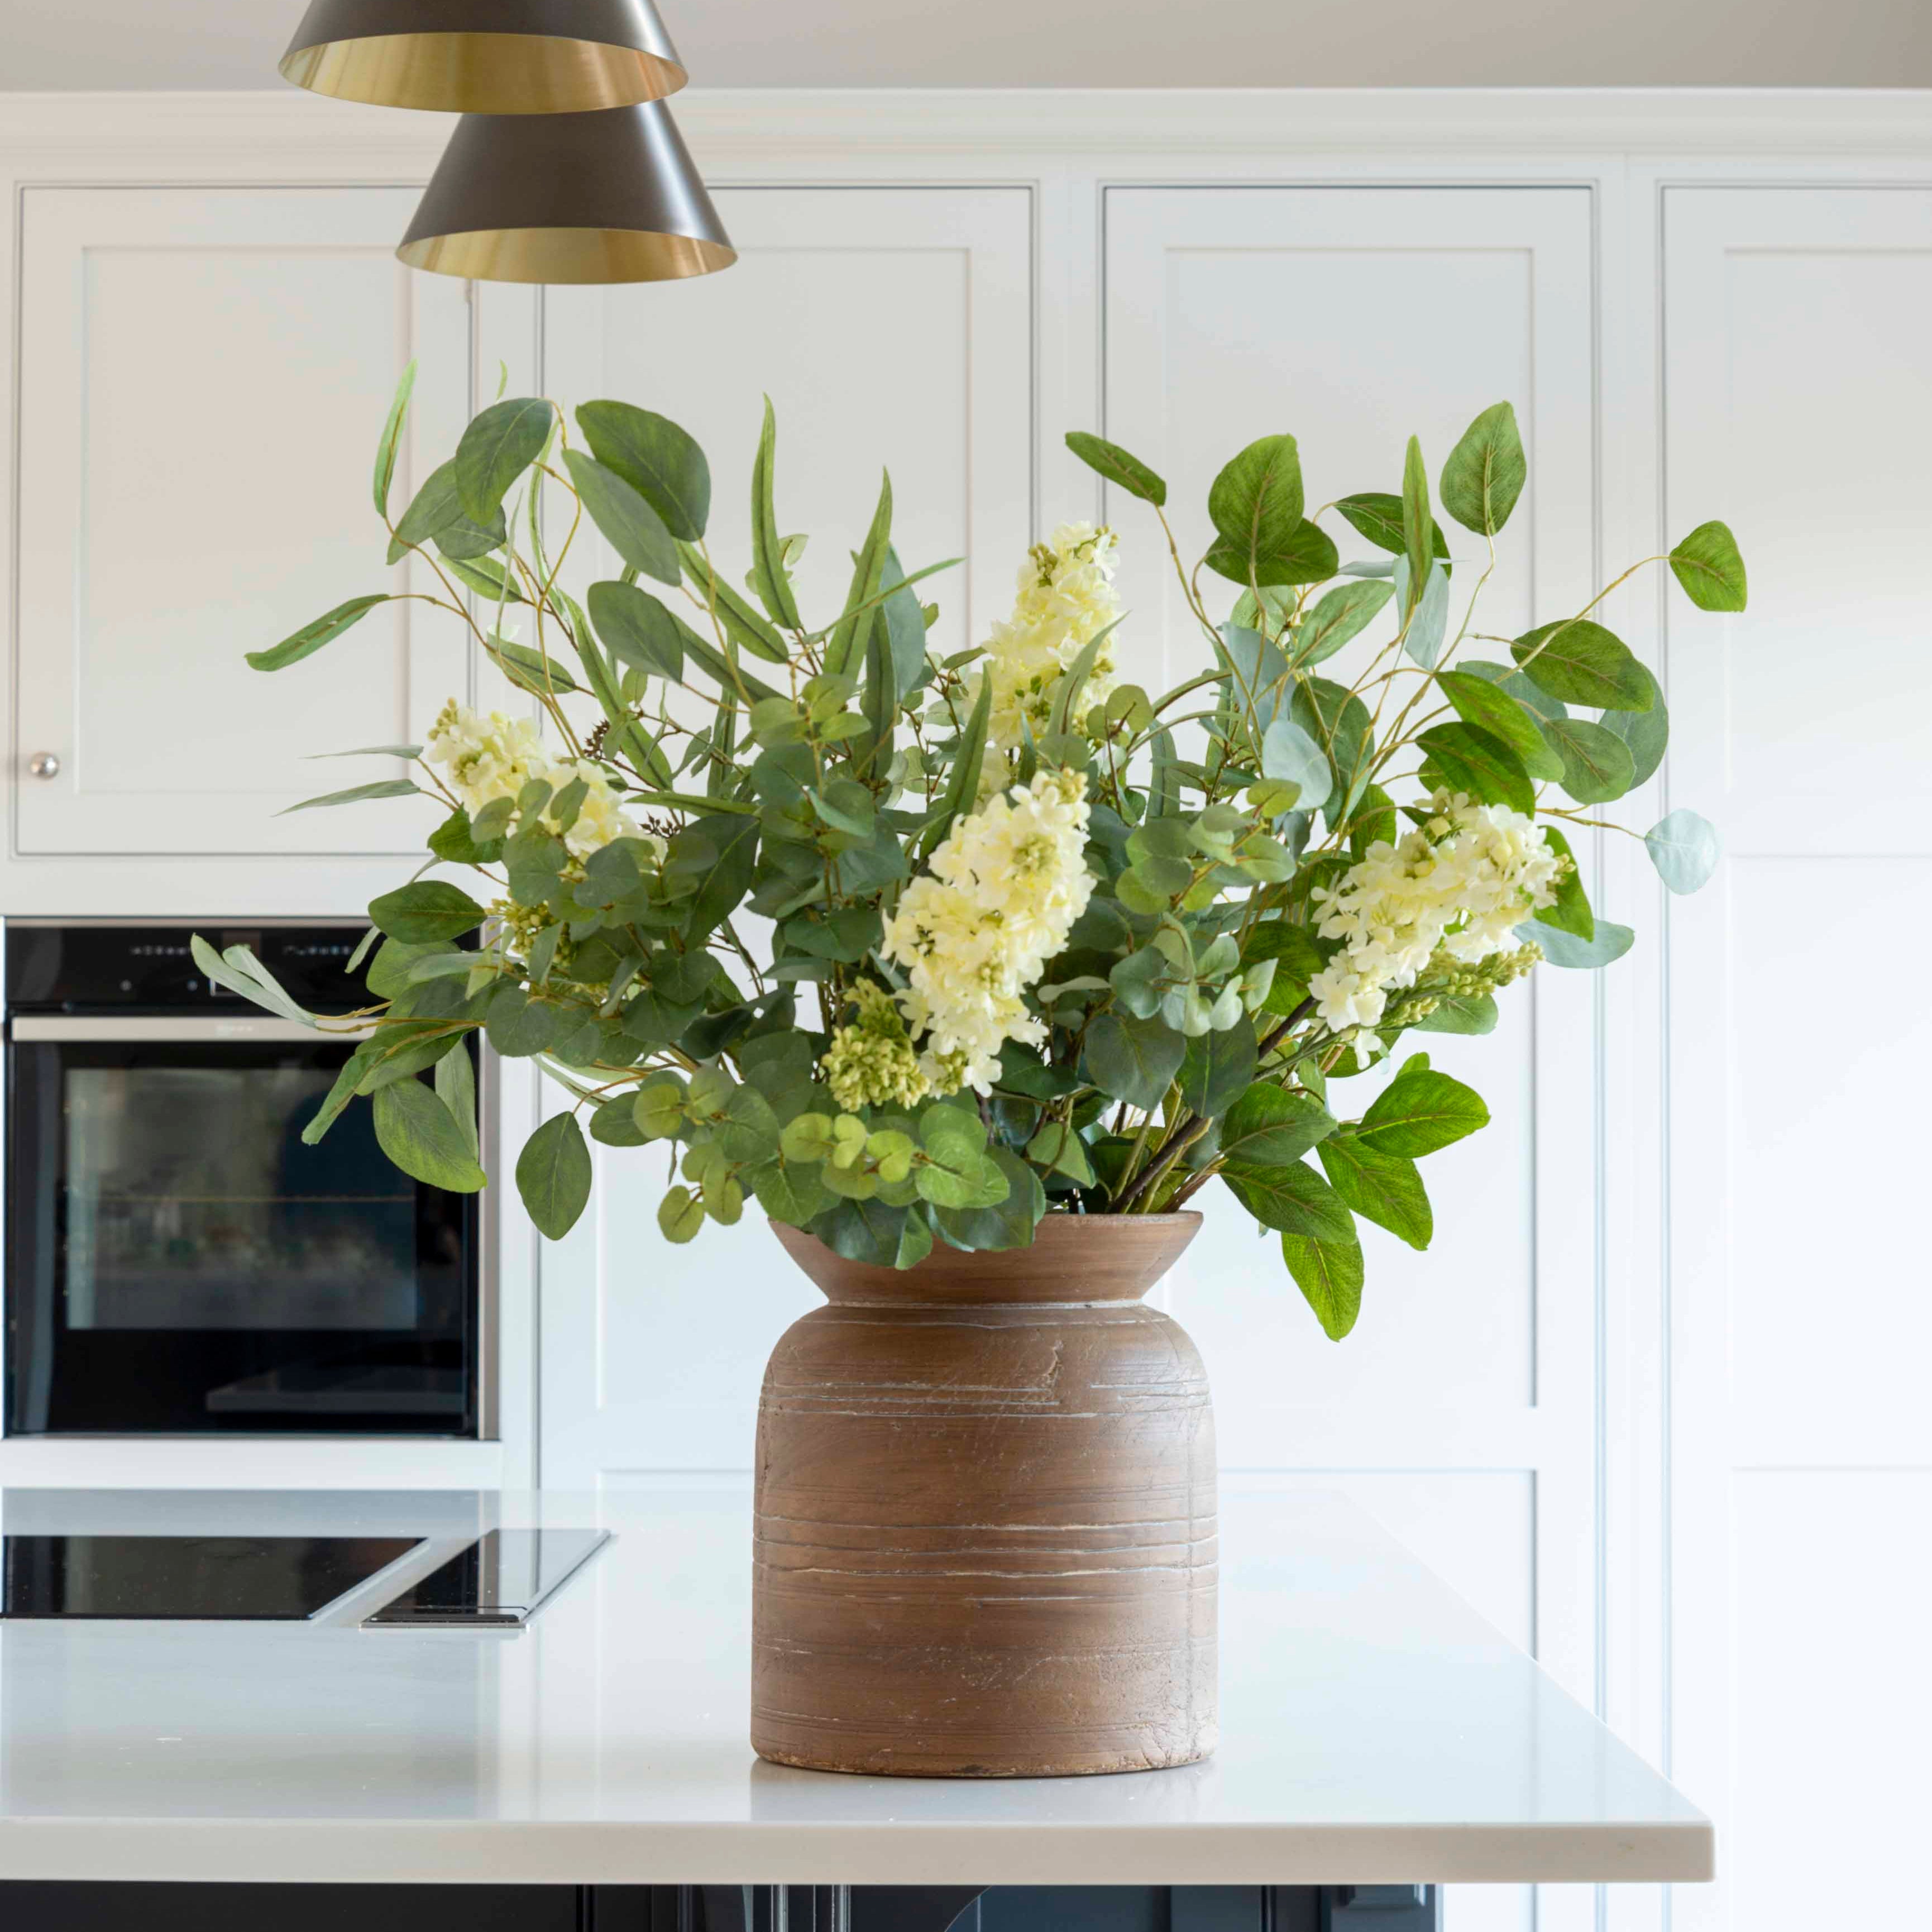 Choosing the Perfect Pot: A Guide to Styling Around Your Home